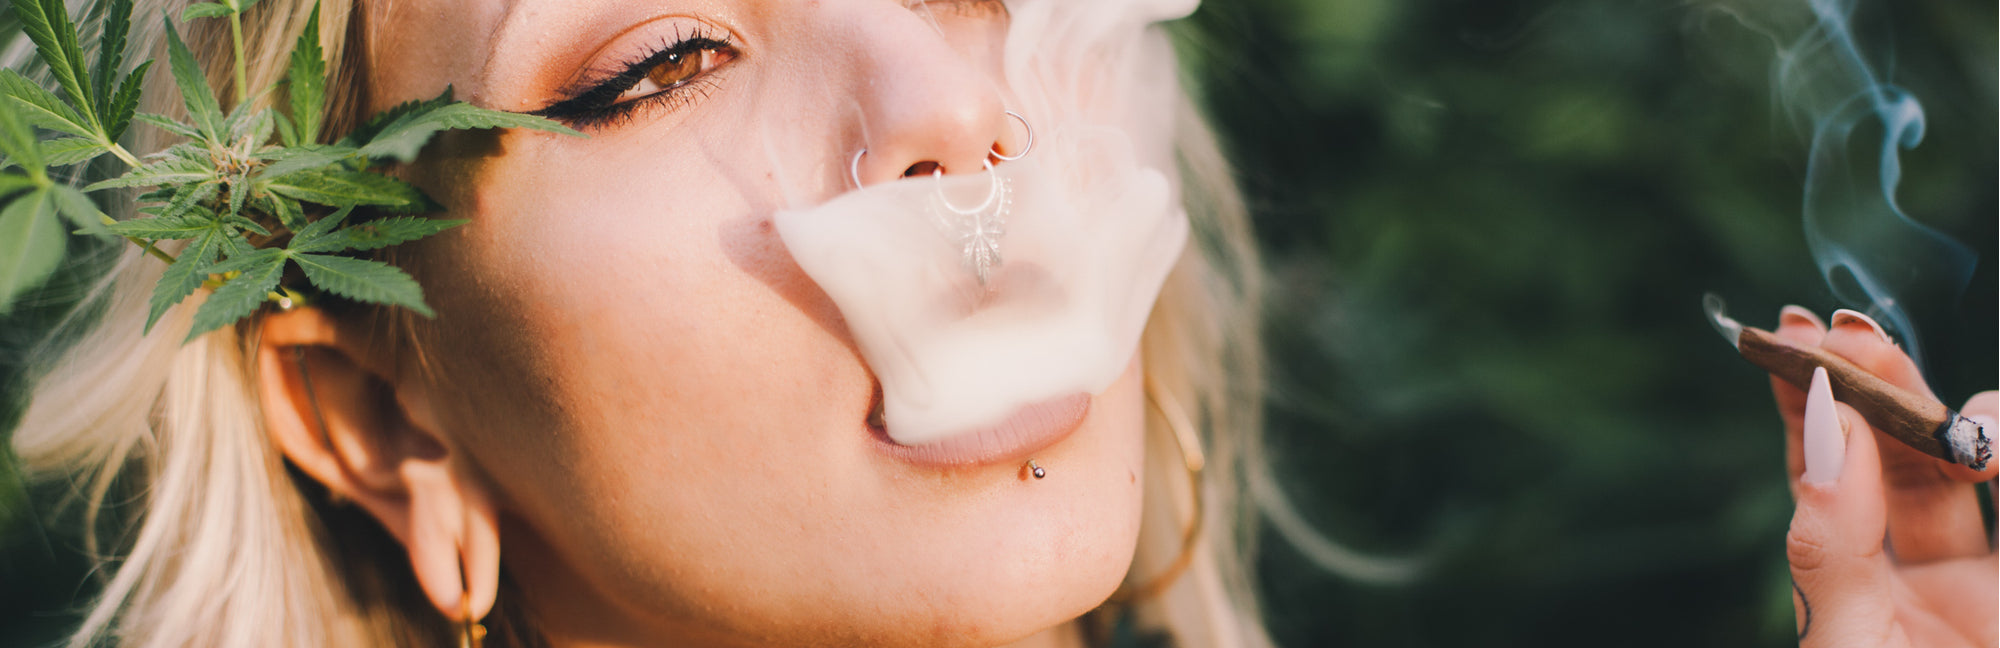 Tips For First Time Cannabis Smokers